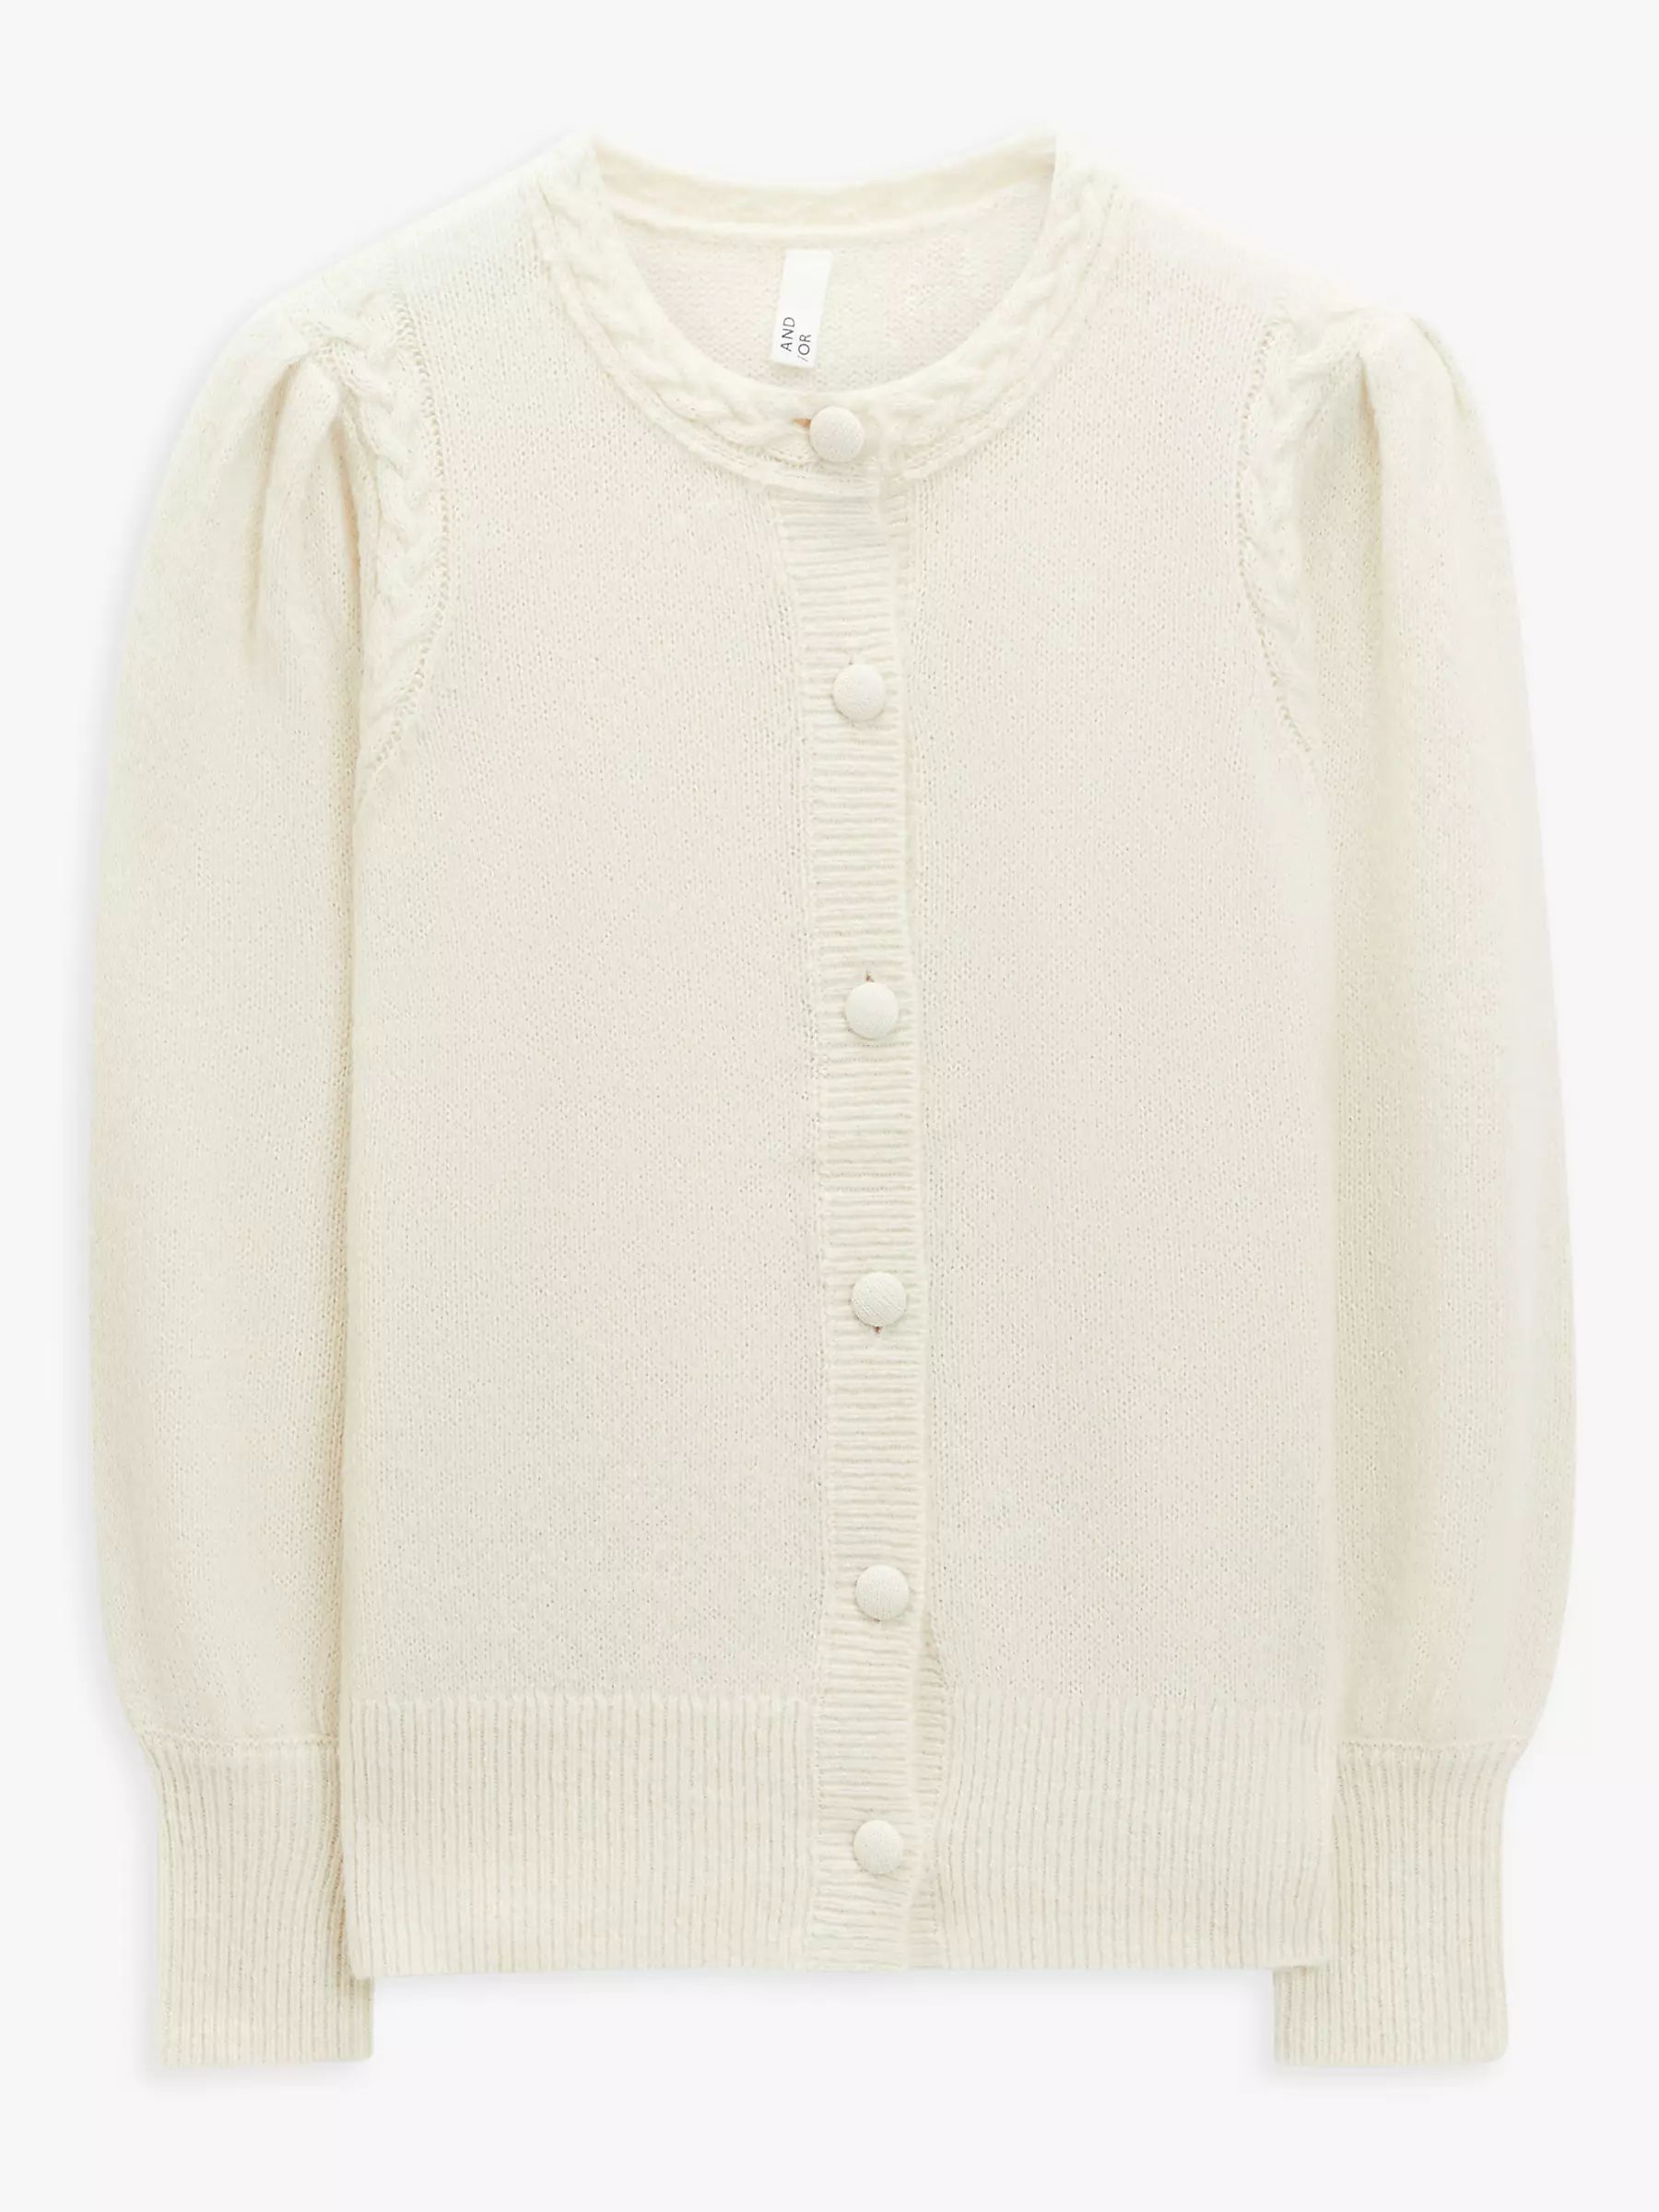 AND/OR Darcy Plain Cable Knit Detailing Cardigan, Ivory | John Lewis (UK)